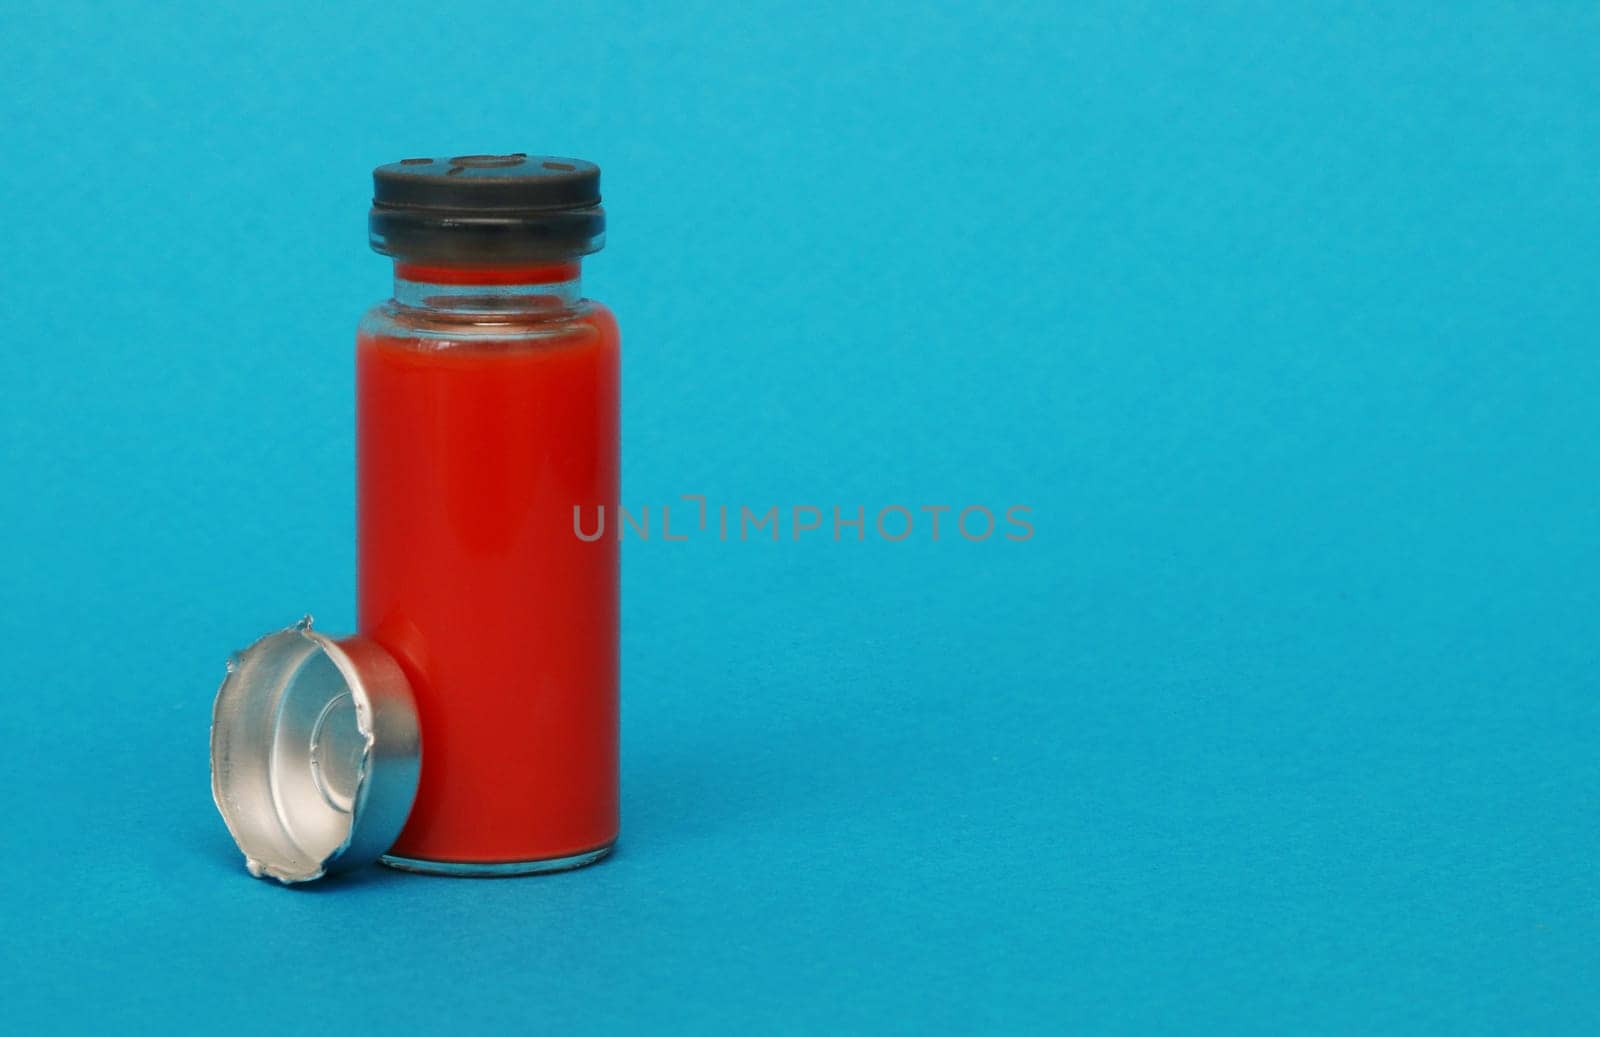 Glass vial for injections on a blue background. by gelog67